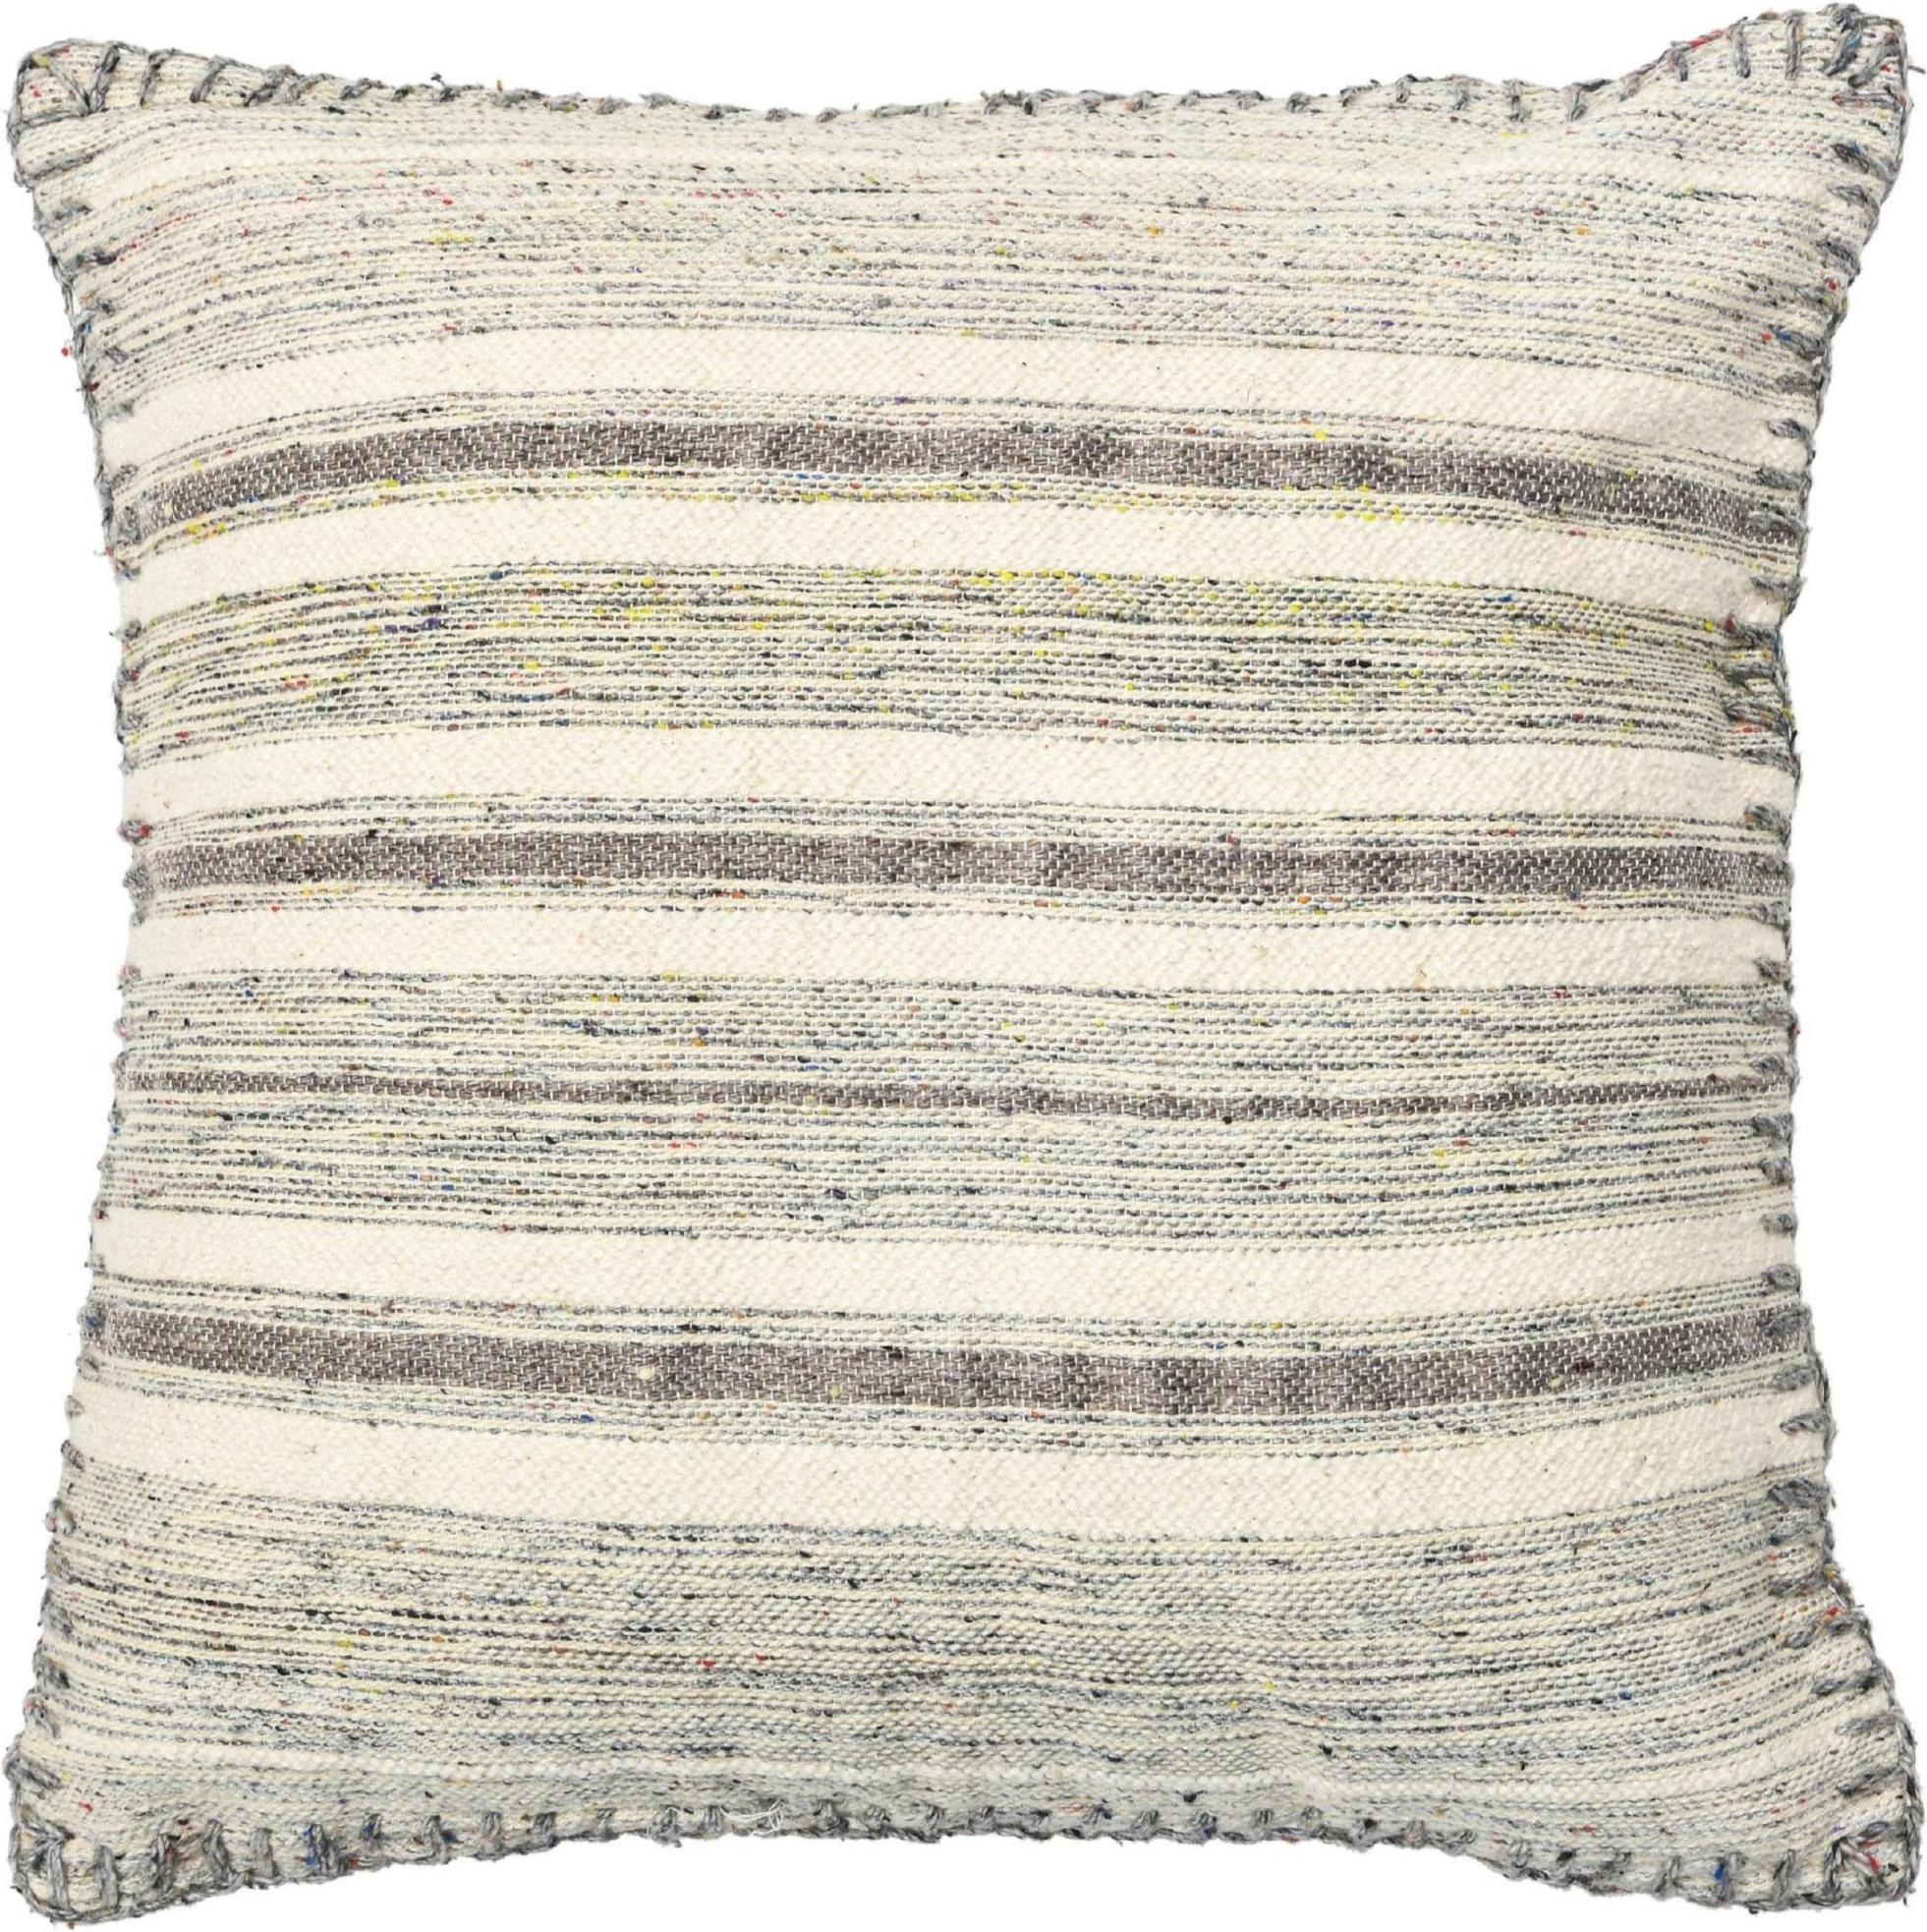 Modern Chic Wool and Cotton Pillow With Striped Design In Gray In New Condition For Sale In Norwalk, CT